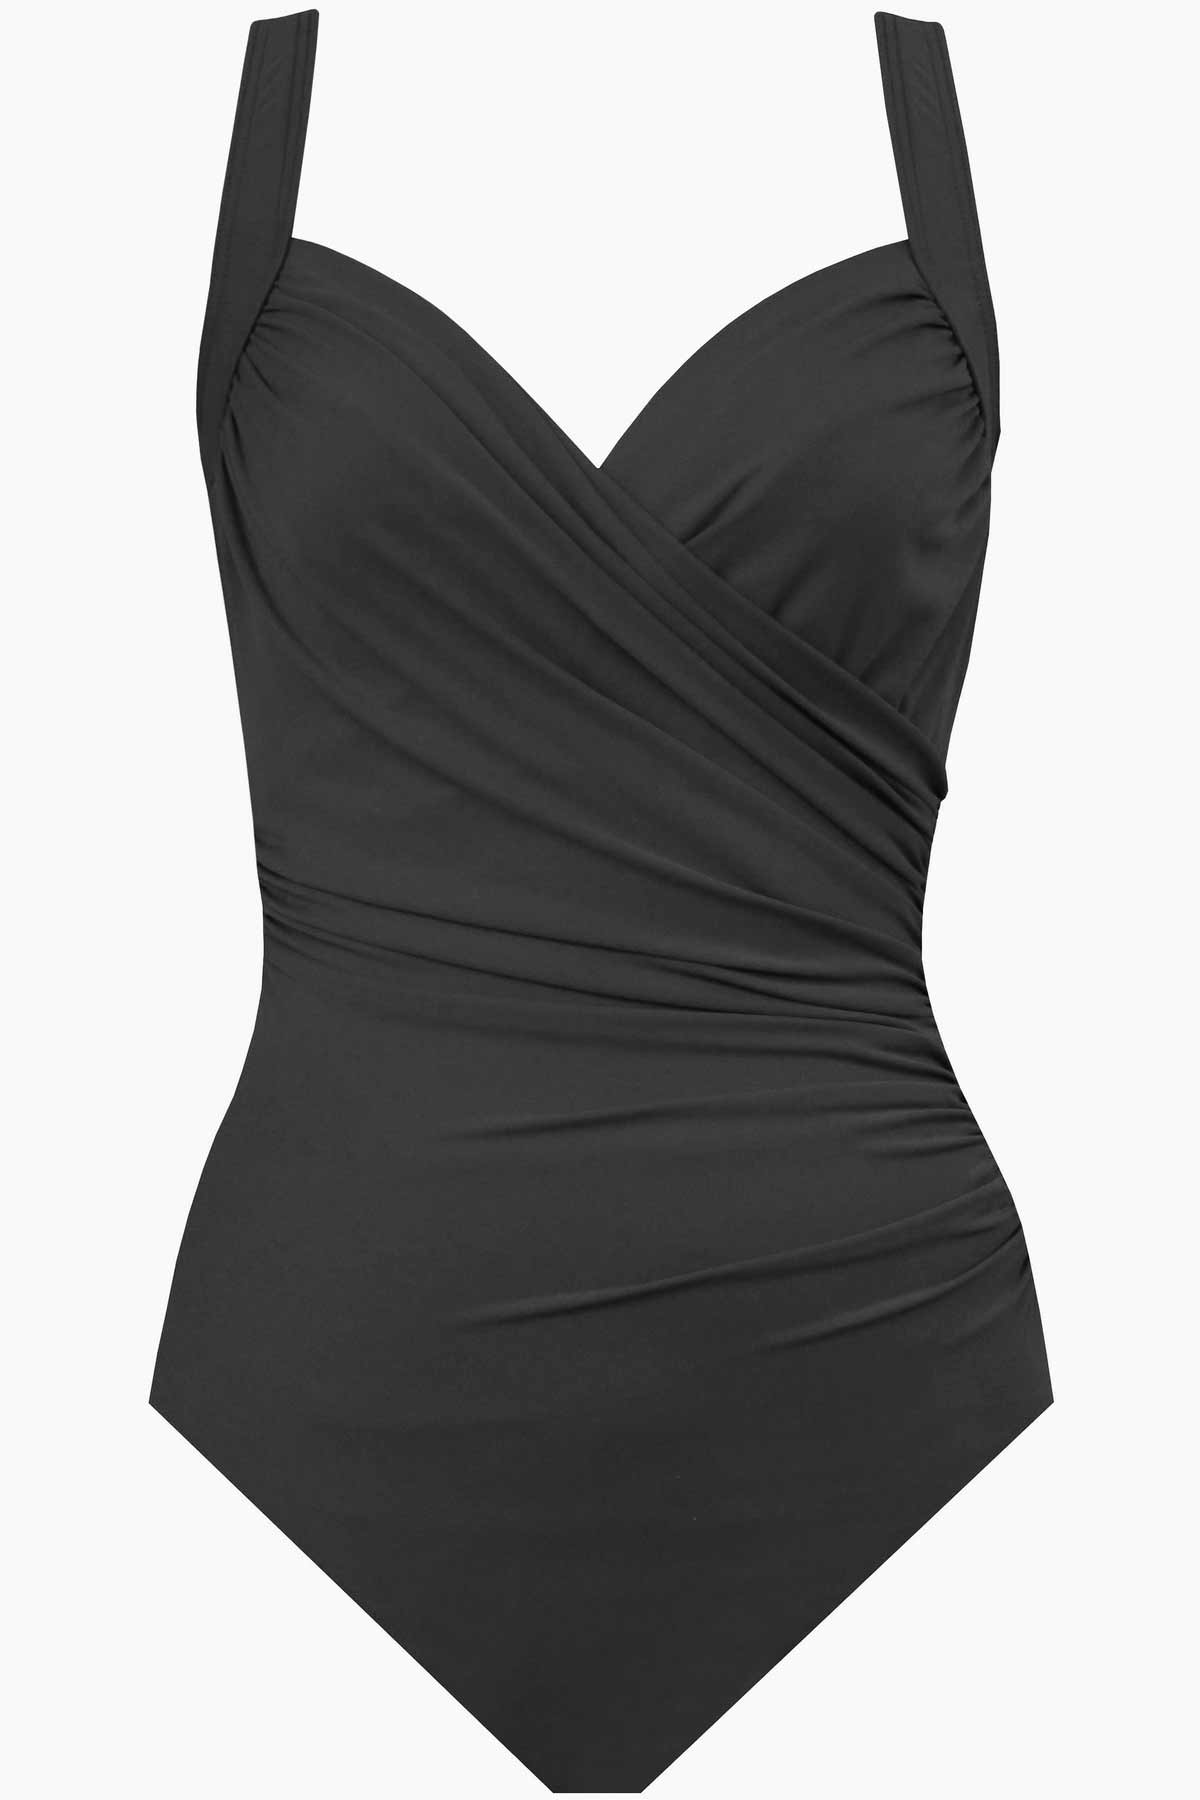 Miraclesuit Must Haves Sanibel One Piece Swimsuit